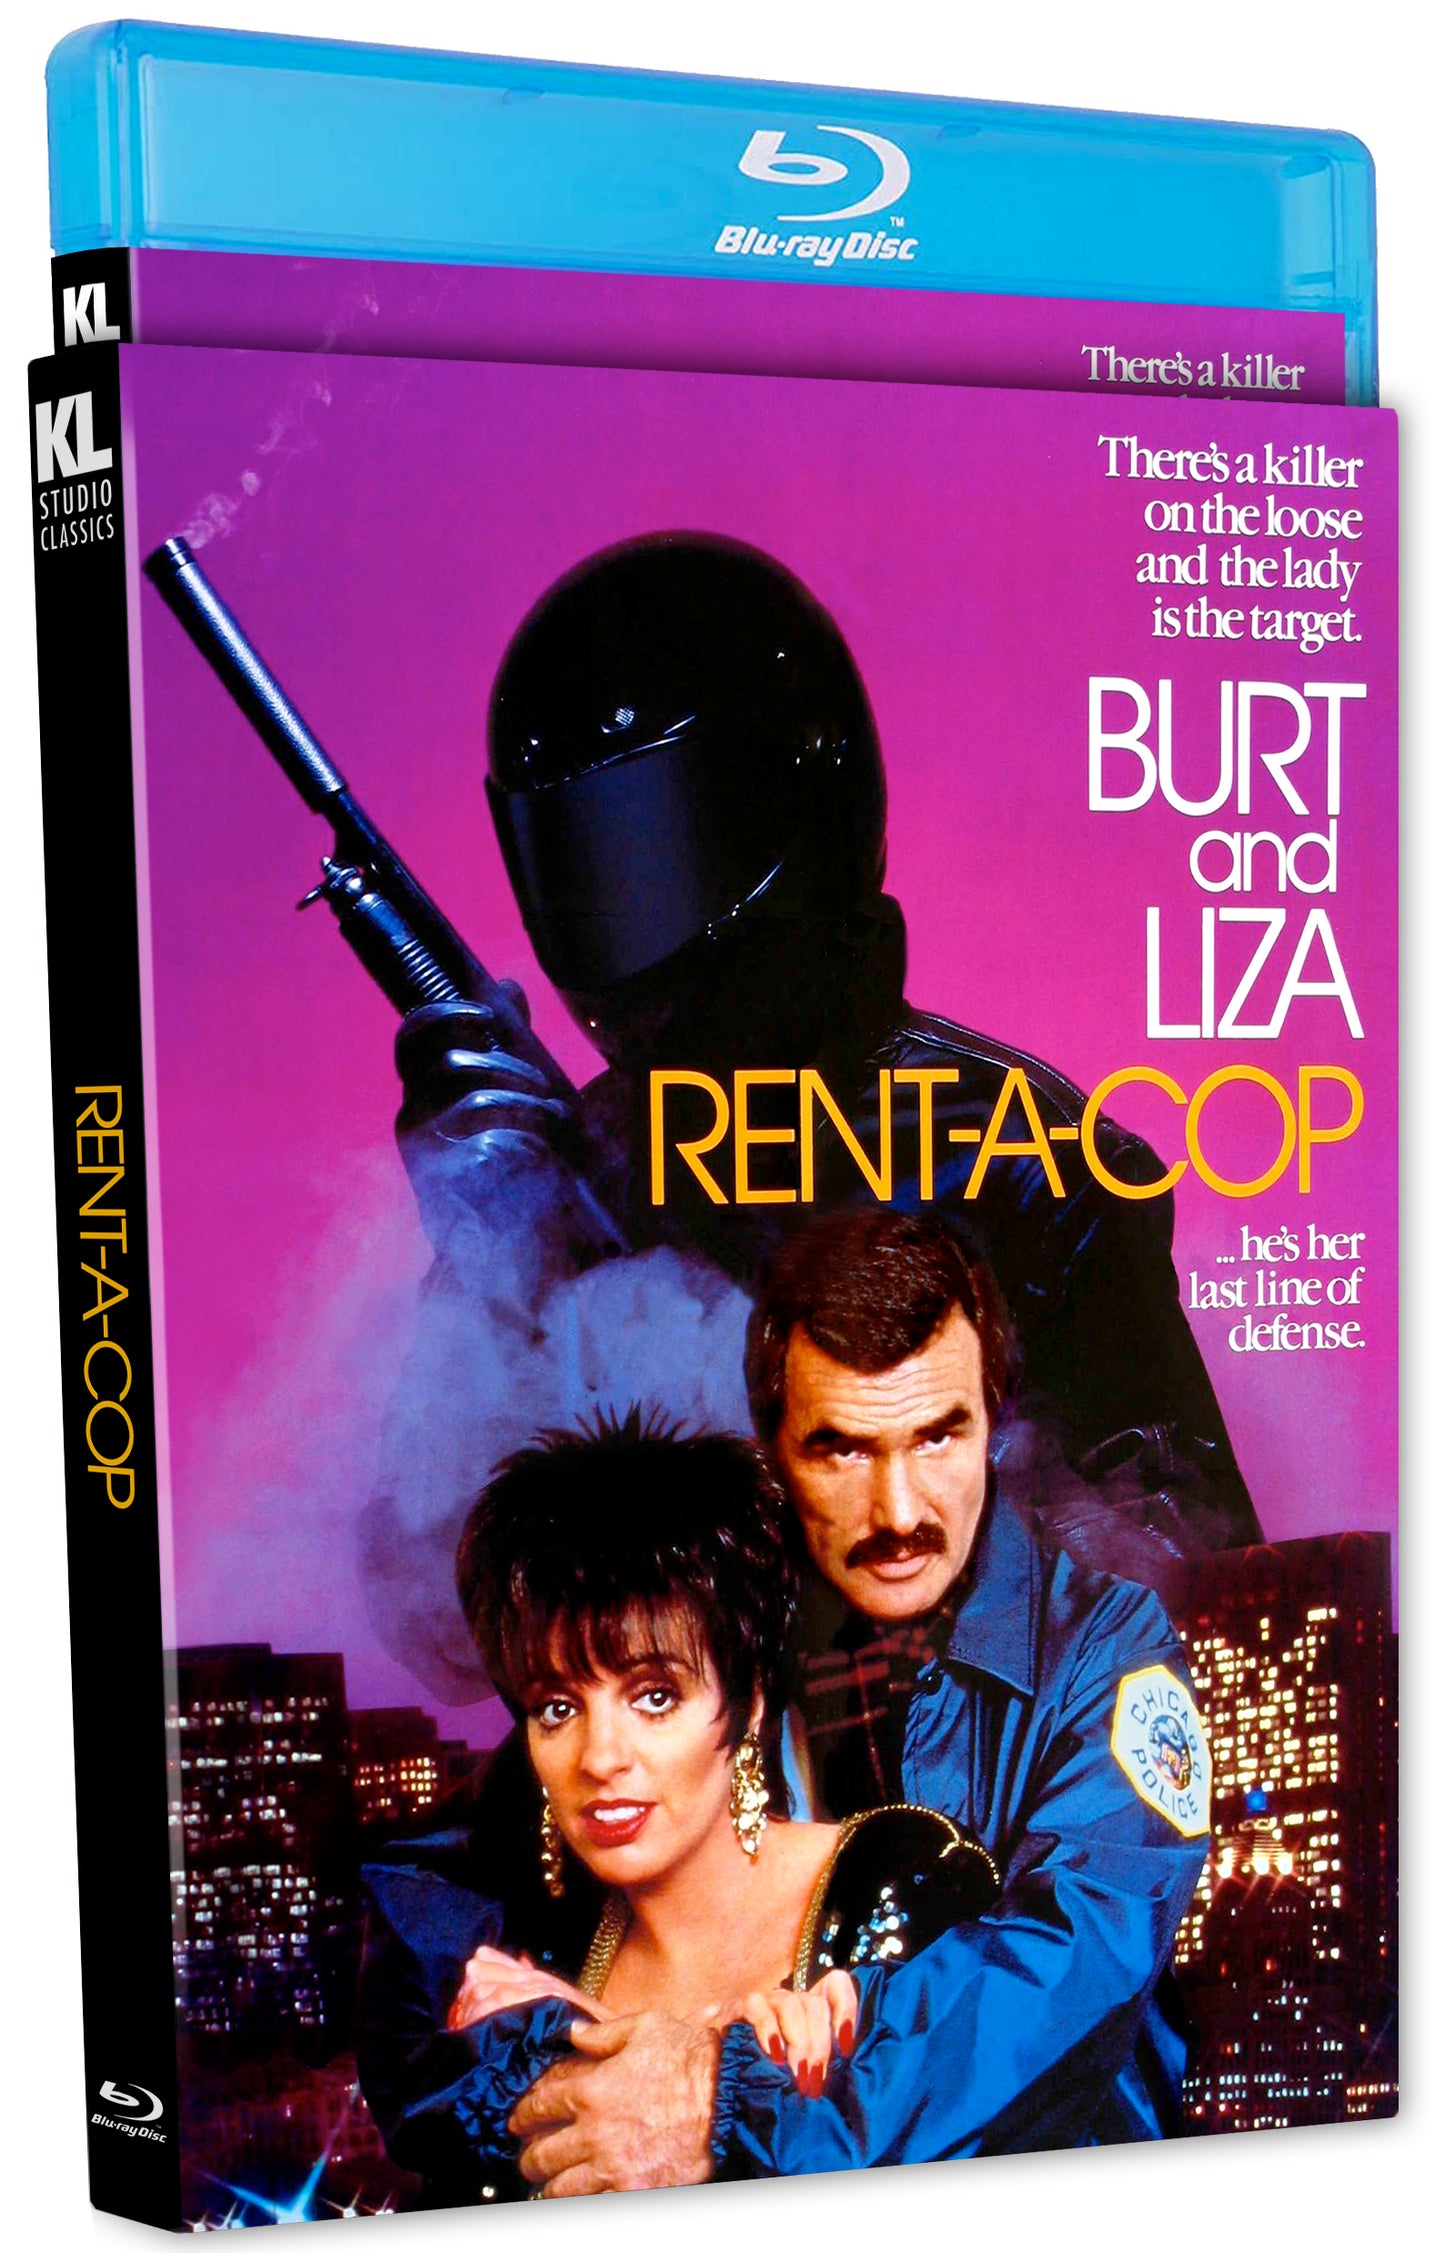 Rent-A-Cop Blu-ray with Slipcover (Kino Lorber) [Preorder]